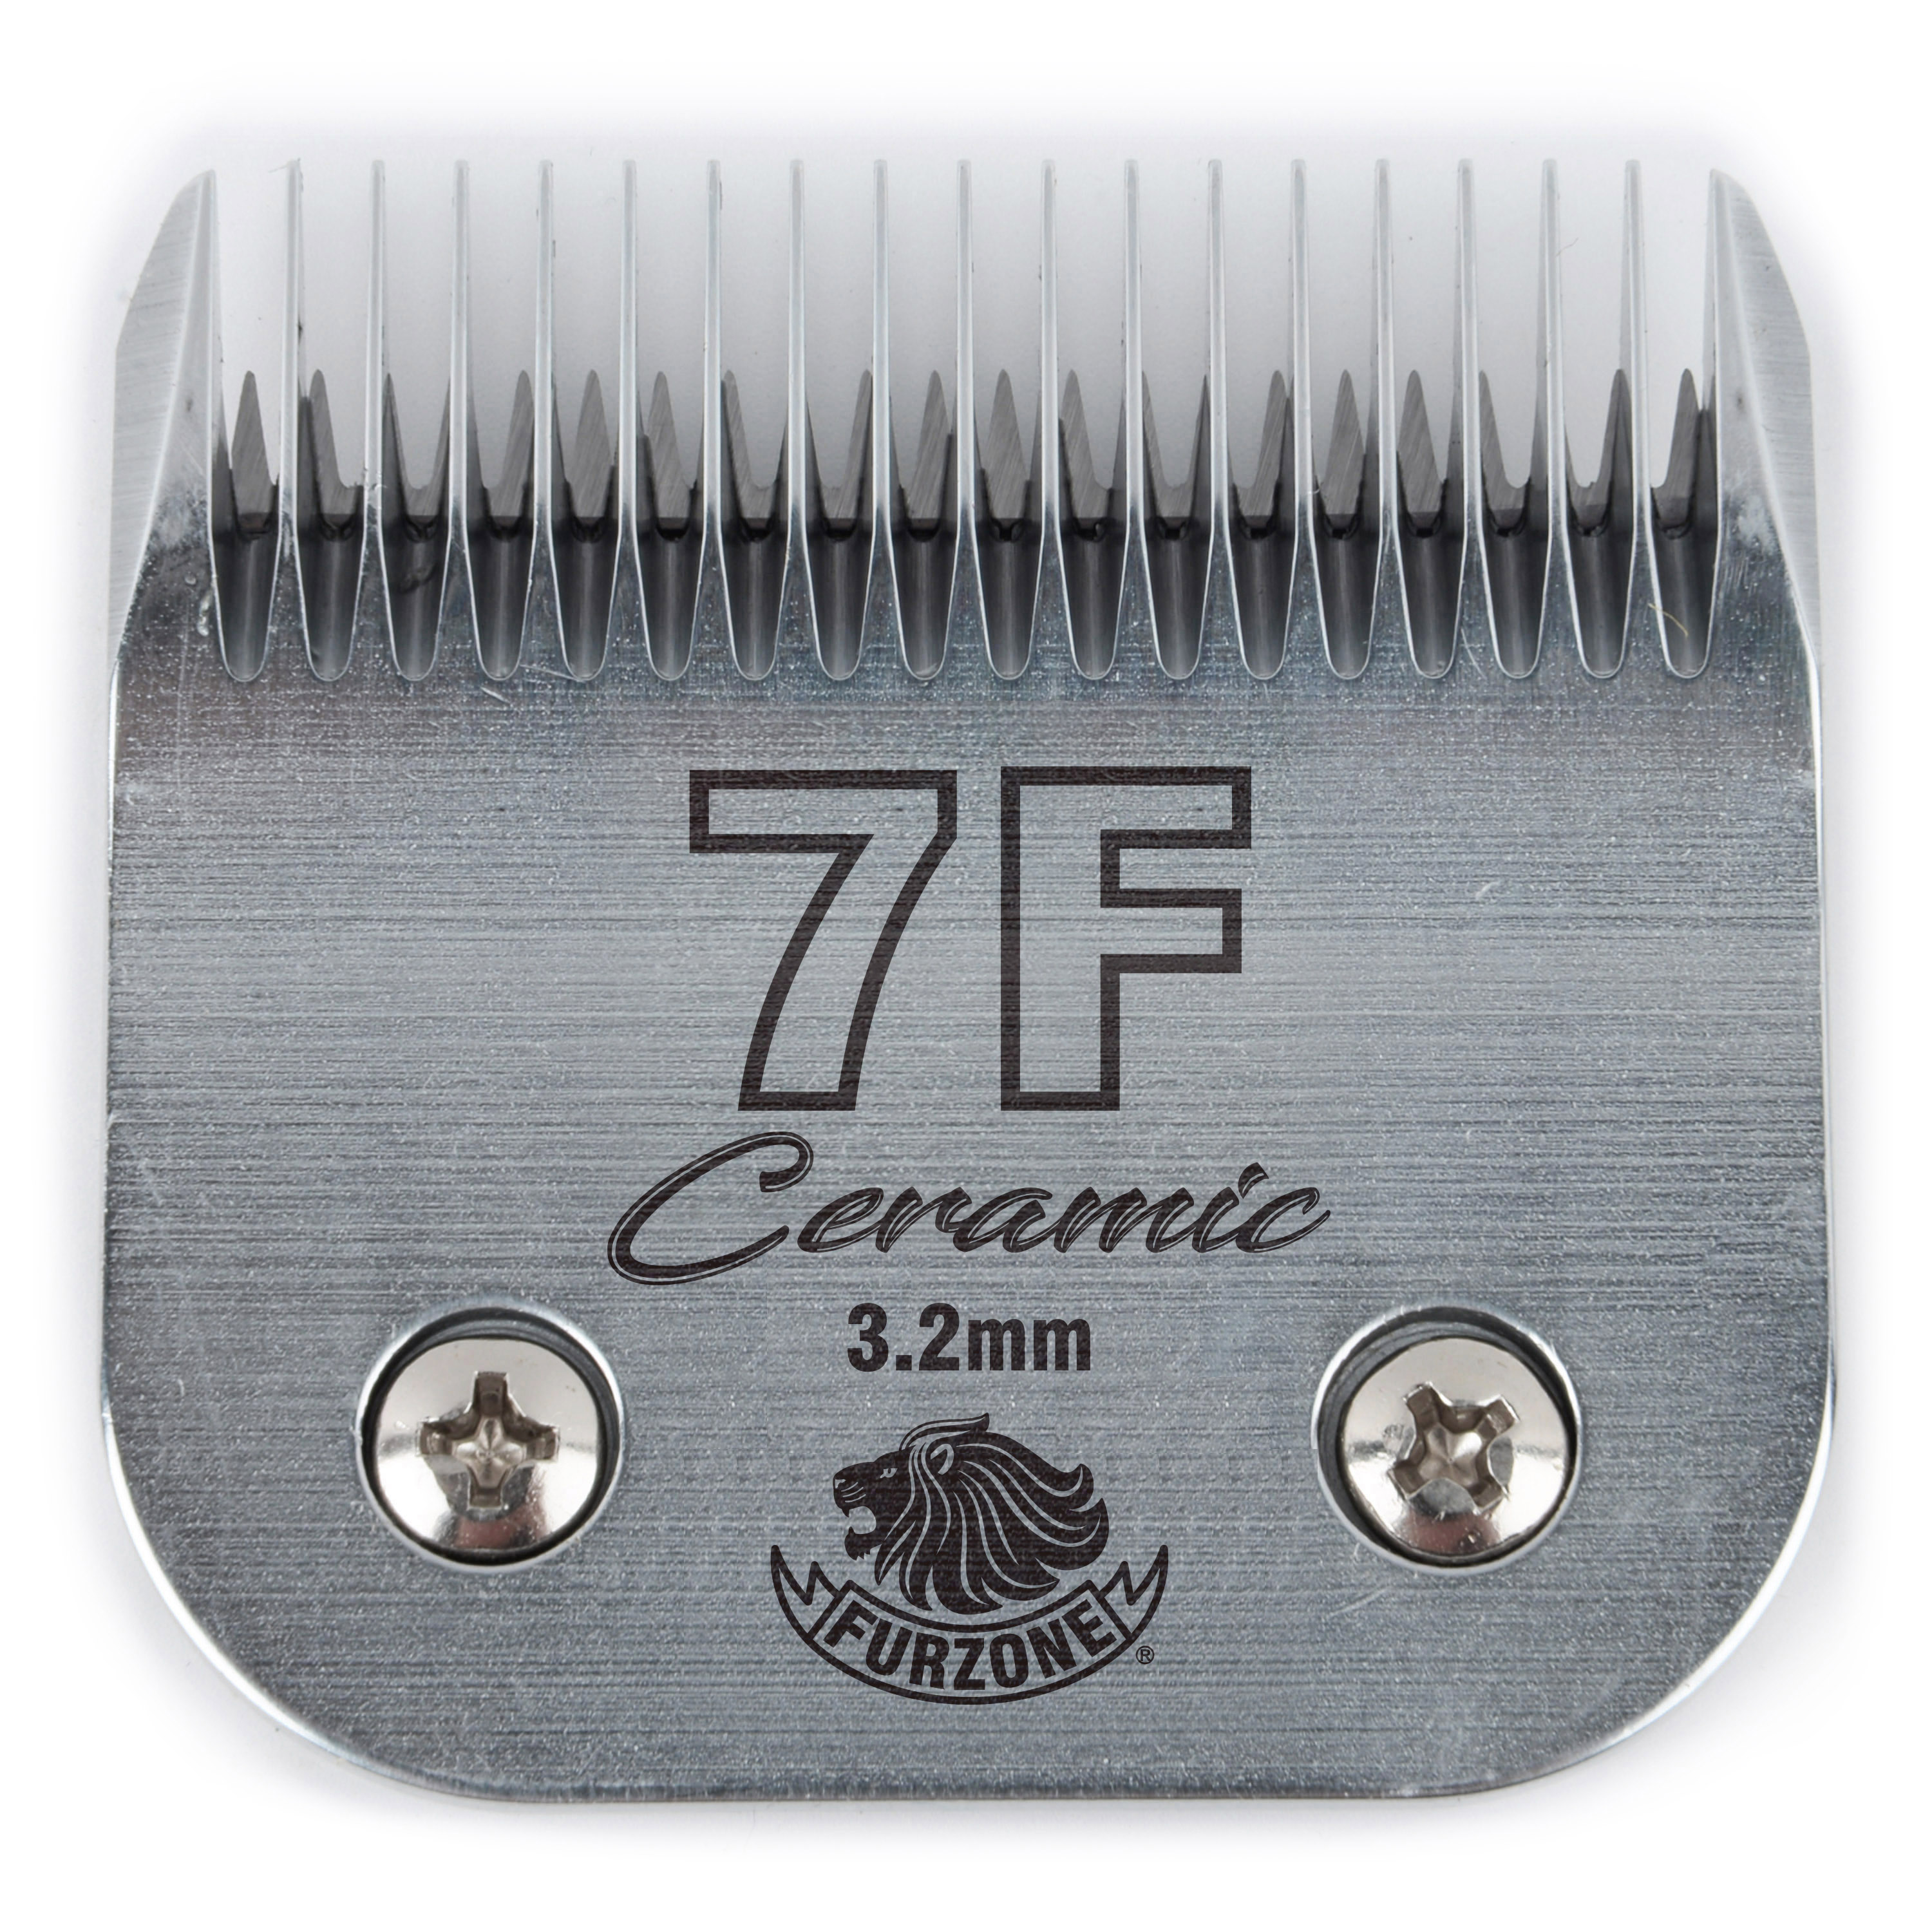 Furzone #7F-3.2mm-Full Teeth Professional A5 Detachable Blade - Made Of High-Tech Ceramic Materials